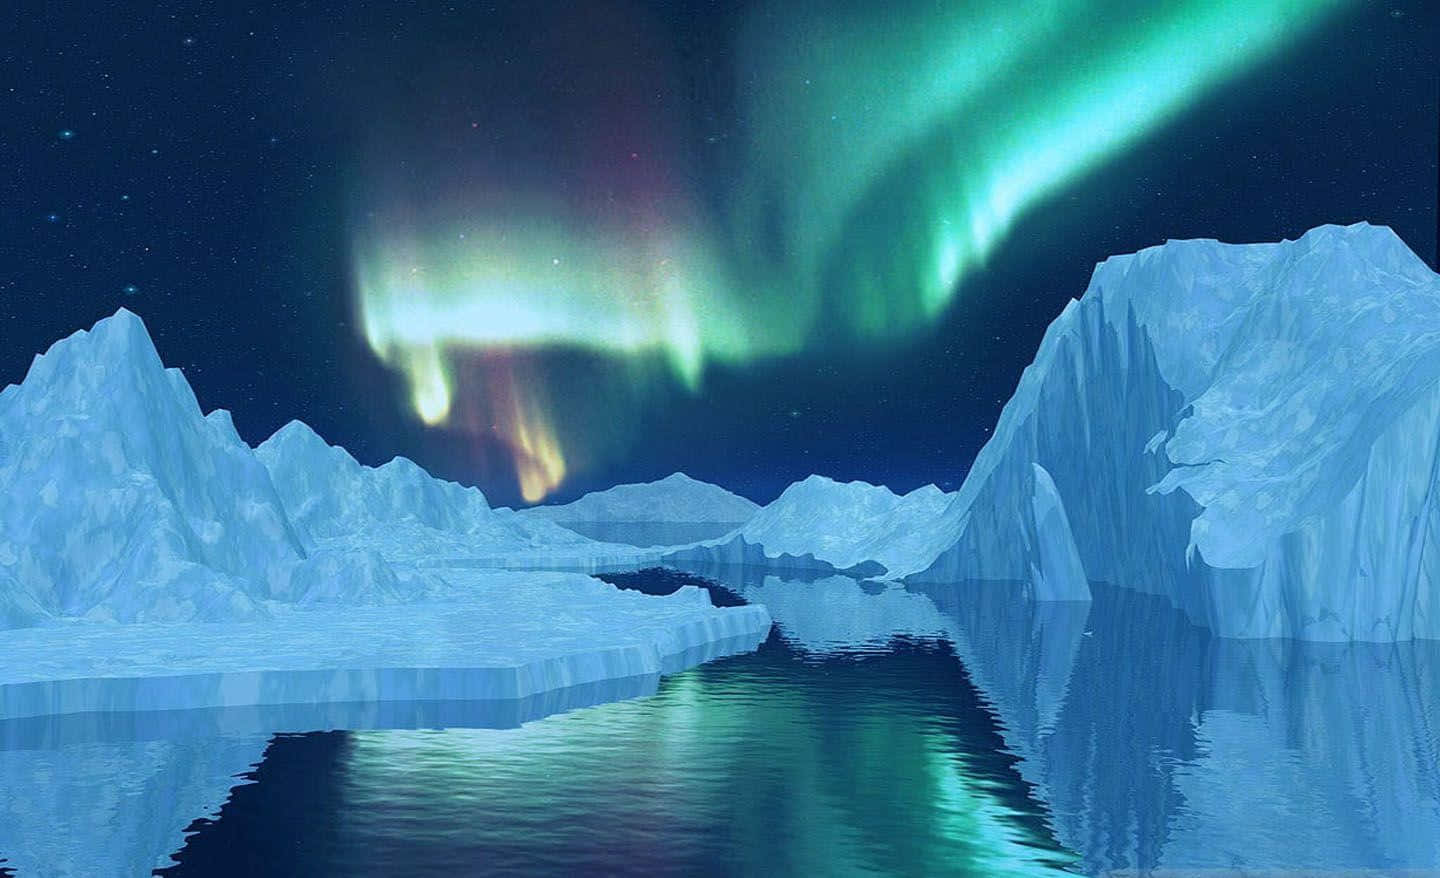 Discover the unimaginable beauty of the North Pole